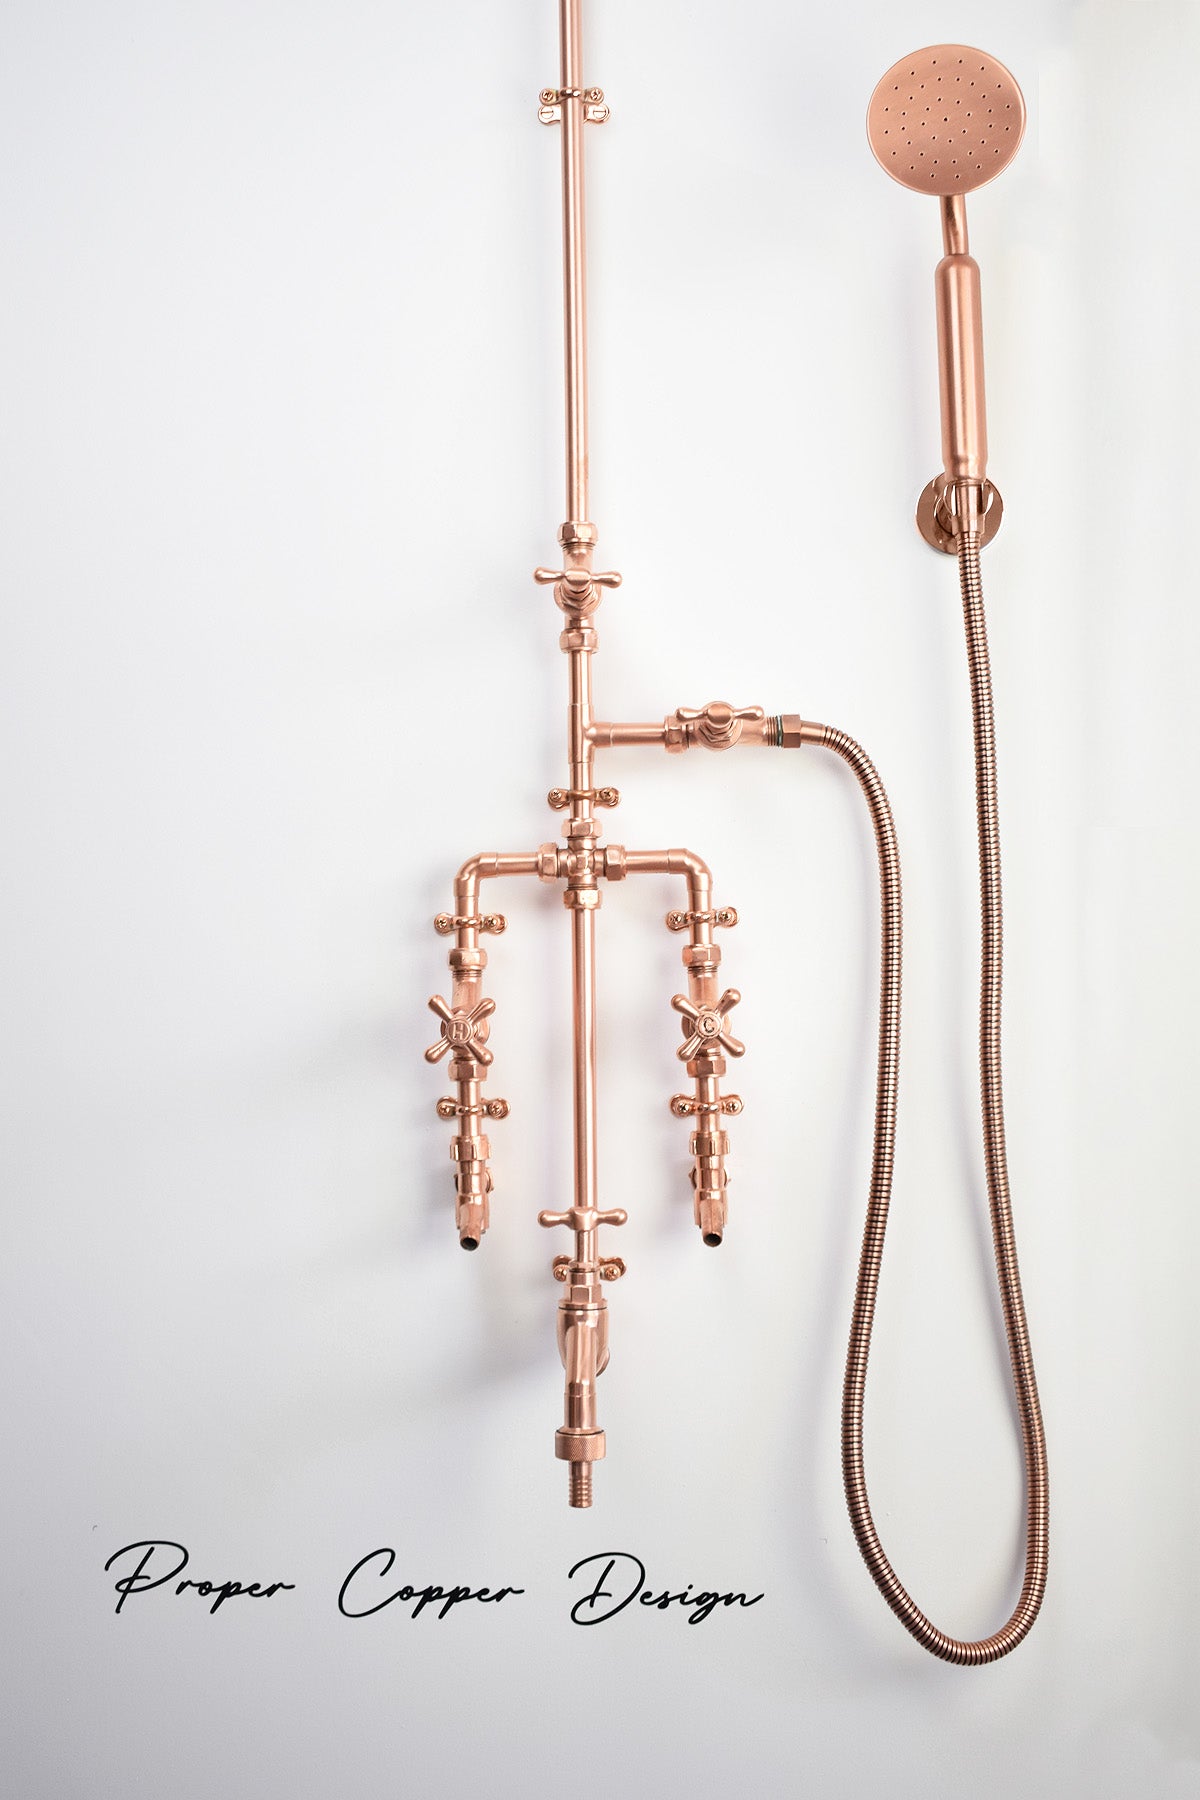 copper shower perfect for your outdoor shower fixtures Australia